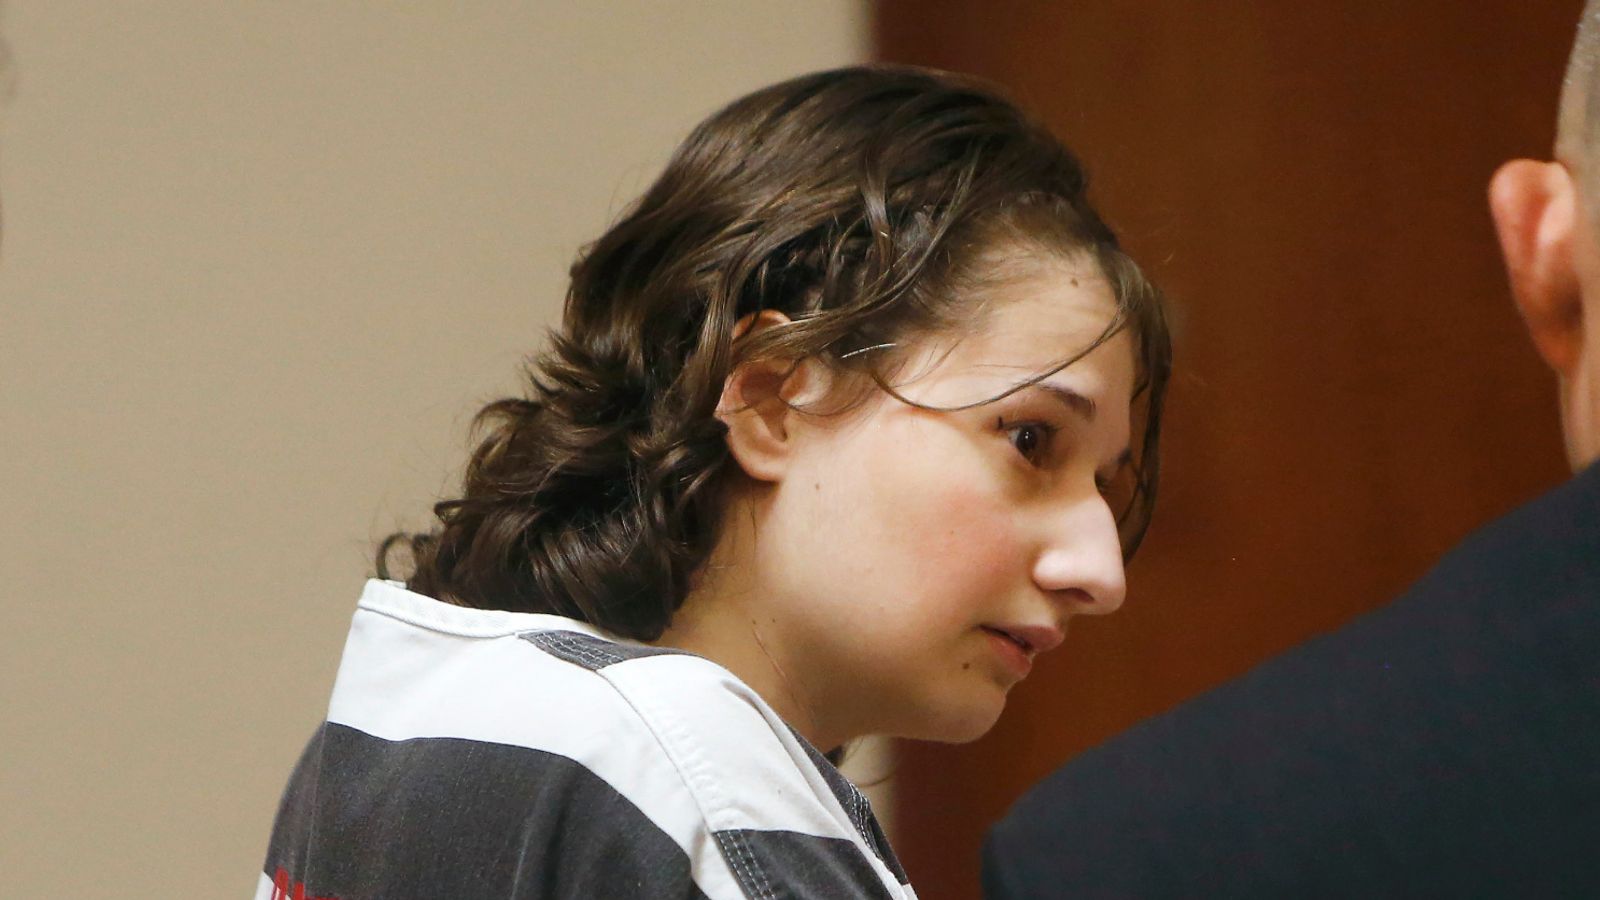 Gypsy Rose Blanchard: Woman who conspired to murder abusive mother released from prison early